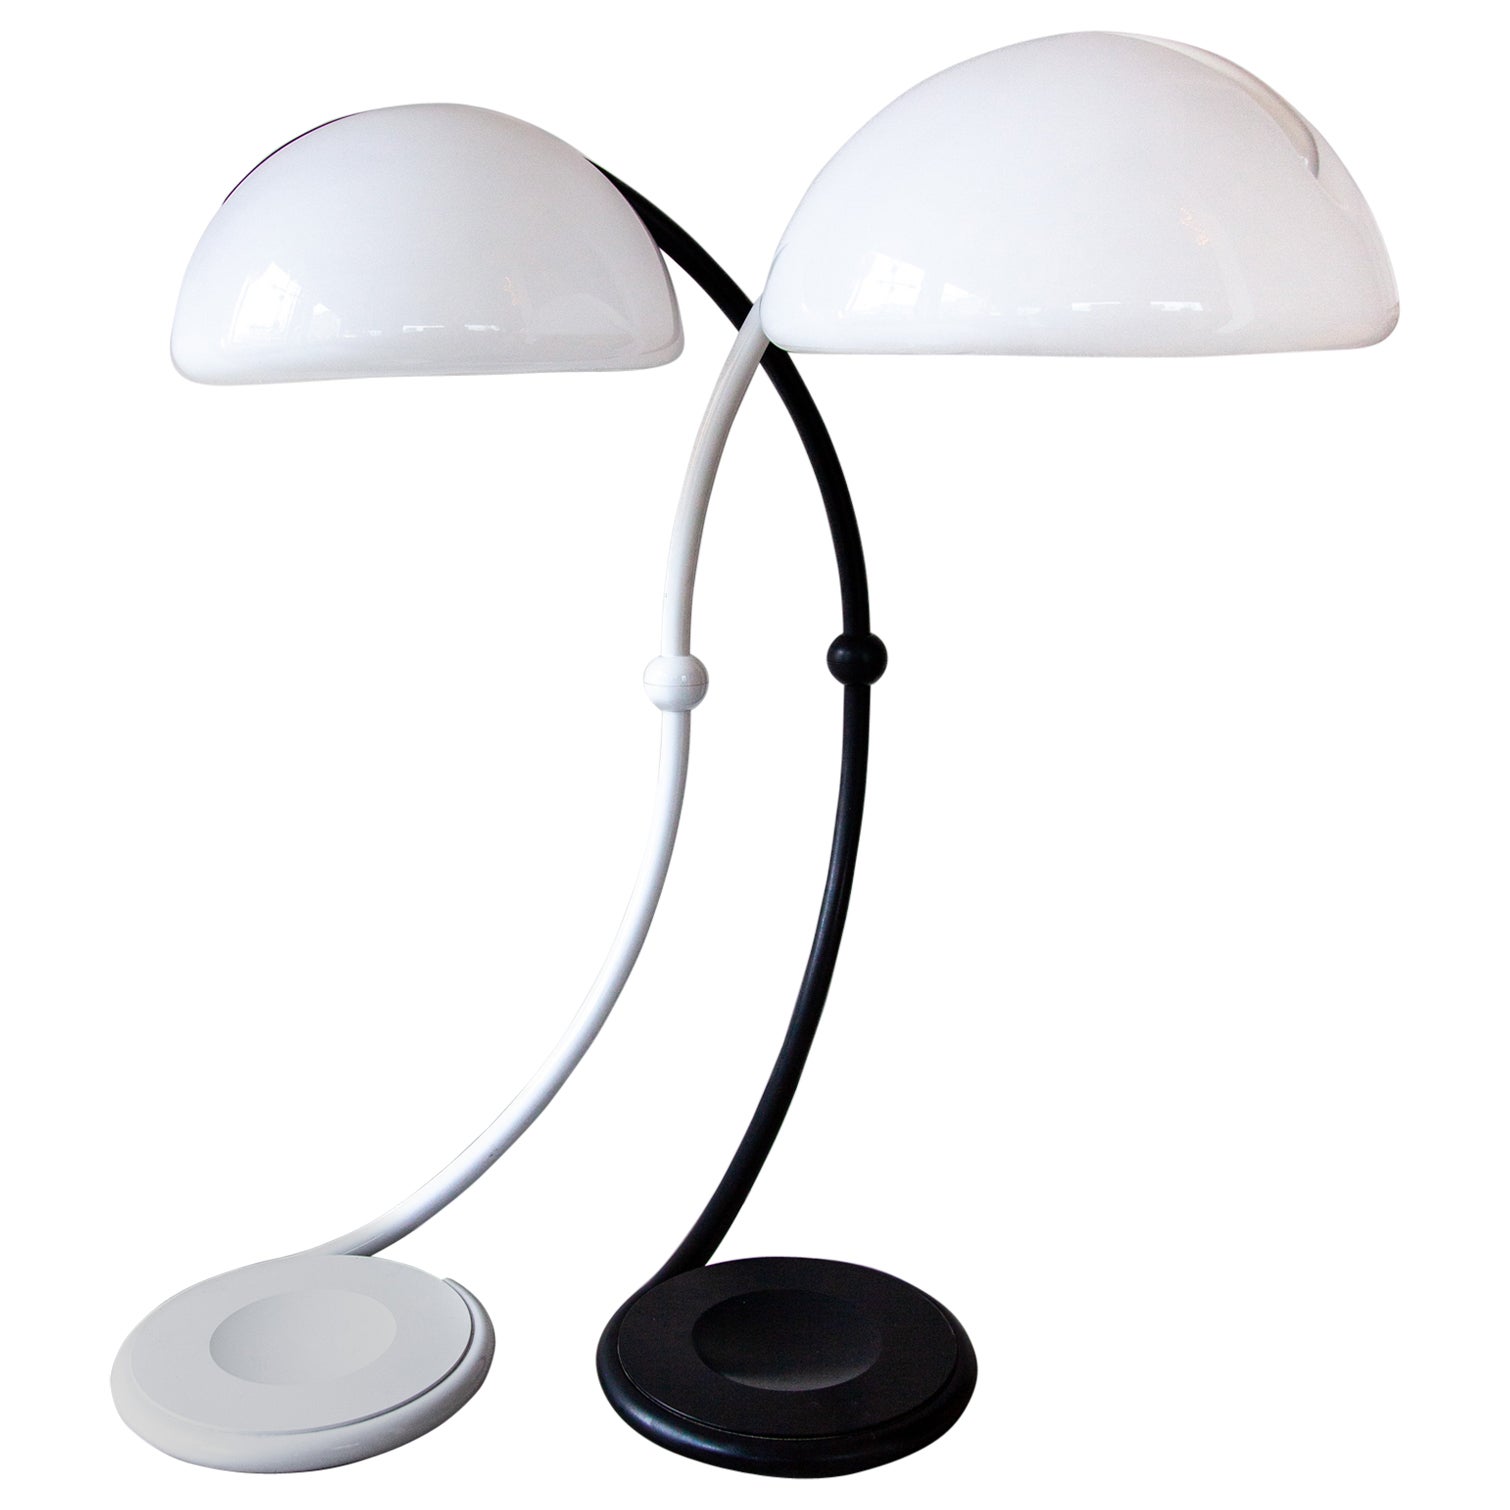 Set of Two Model"Serpente" Black and White Martinelli Floor Lamps, Italy